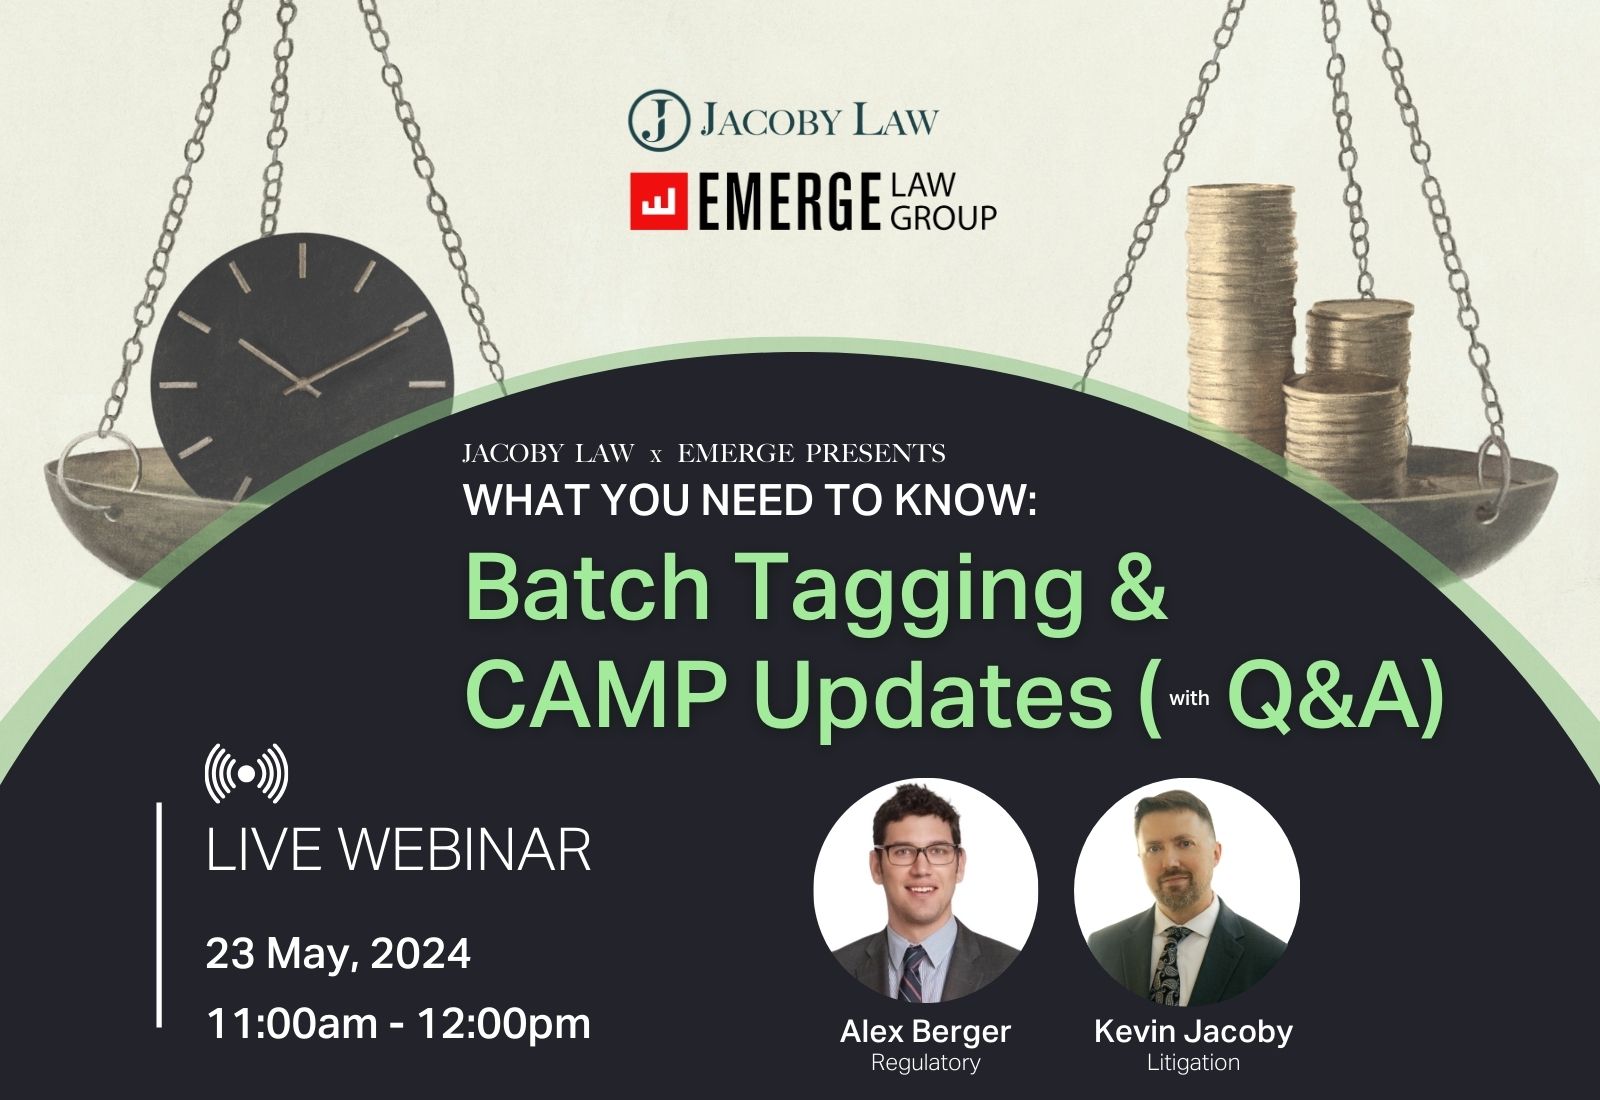 WEBINAR – What You Need to Know: Batch Tagging & CAMP Updates (with Q&A)